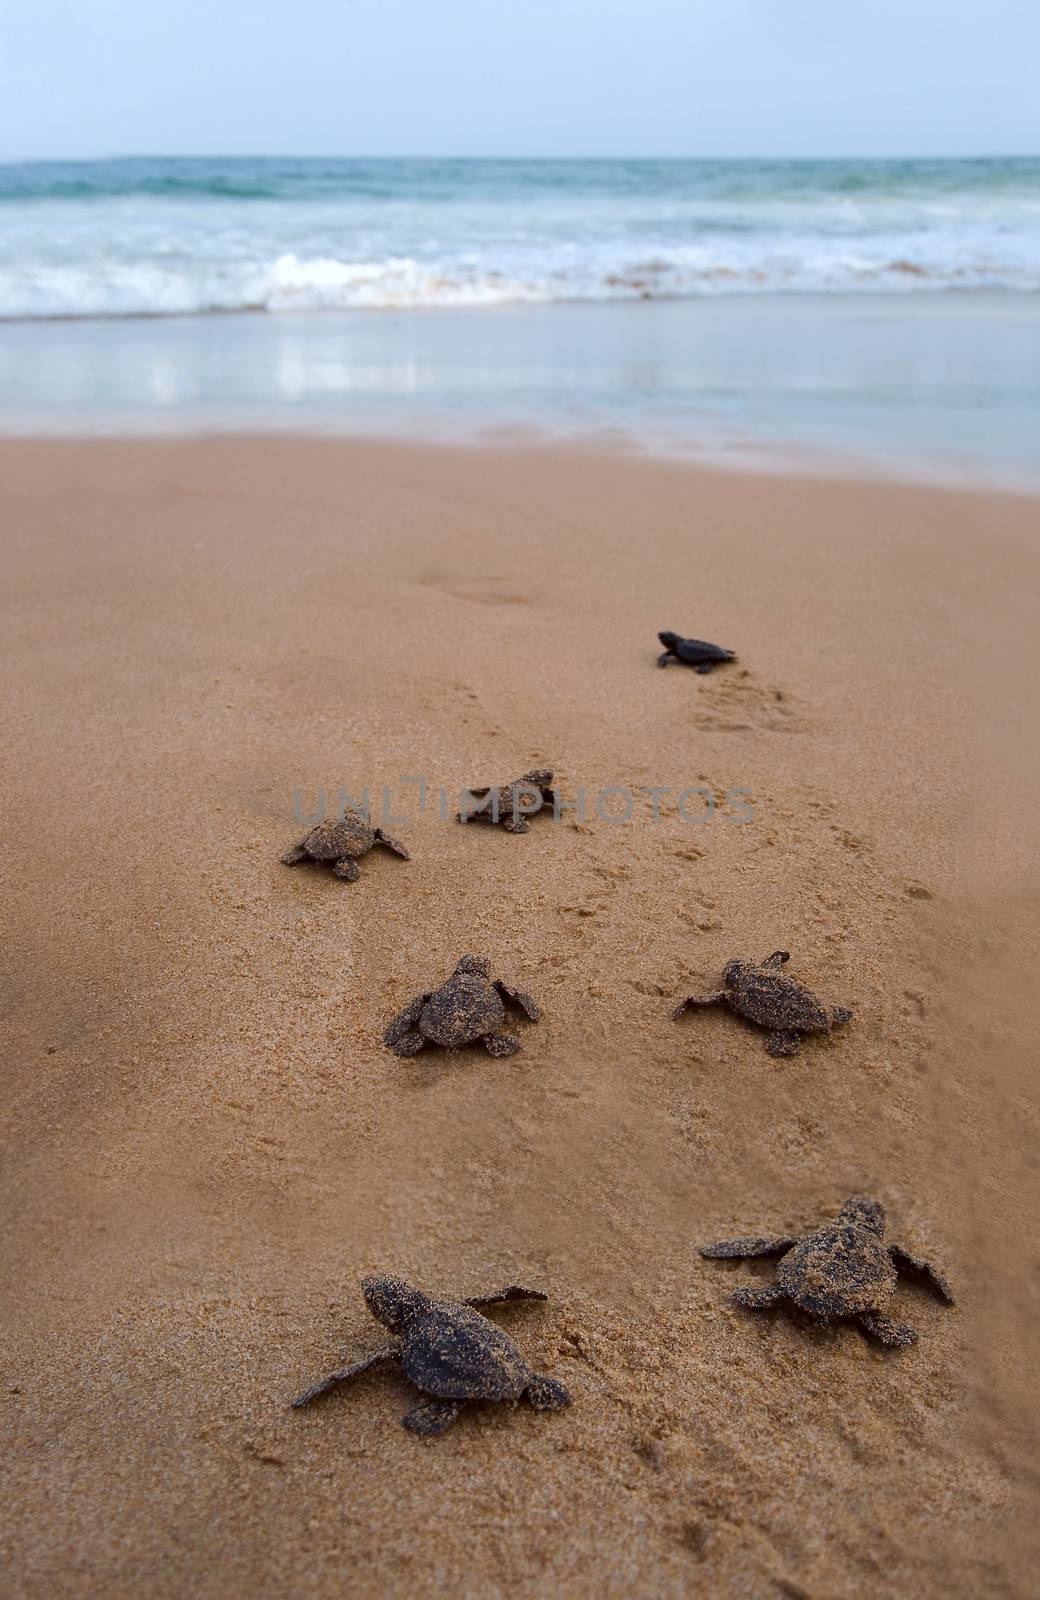 Baby turtles making it's way to the ocean by foryouinf